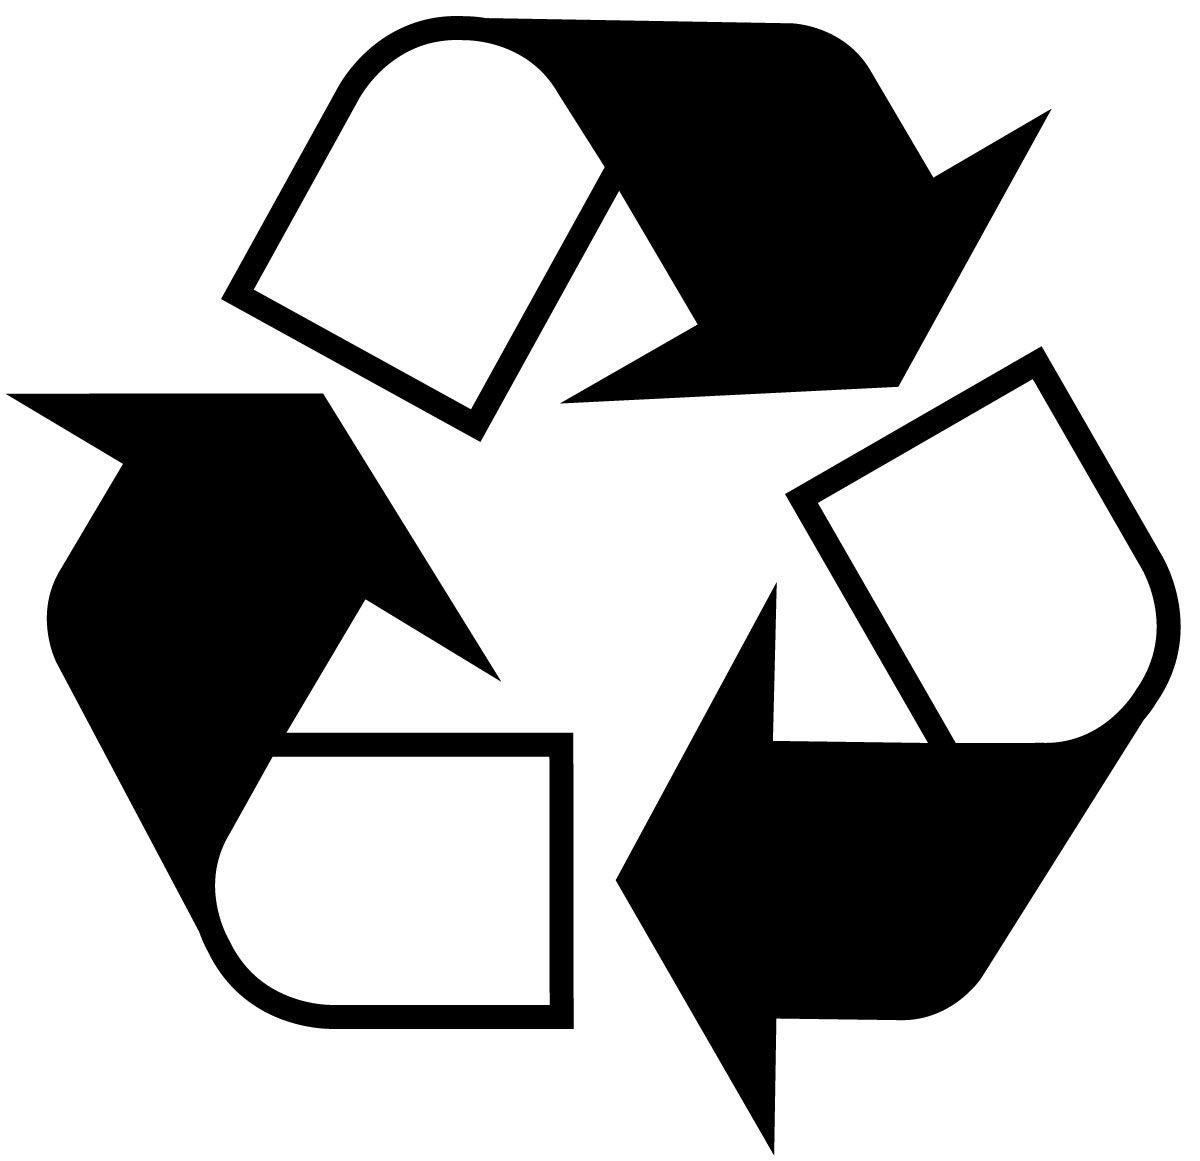 Black and White Recycle Logo - Printable Recycle Symbol